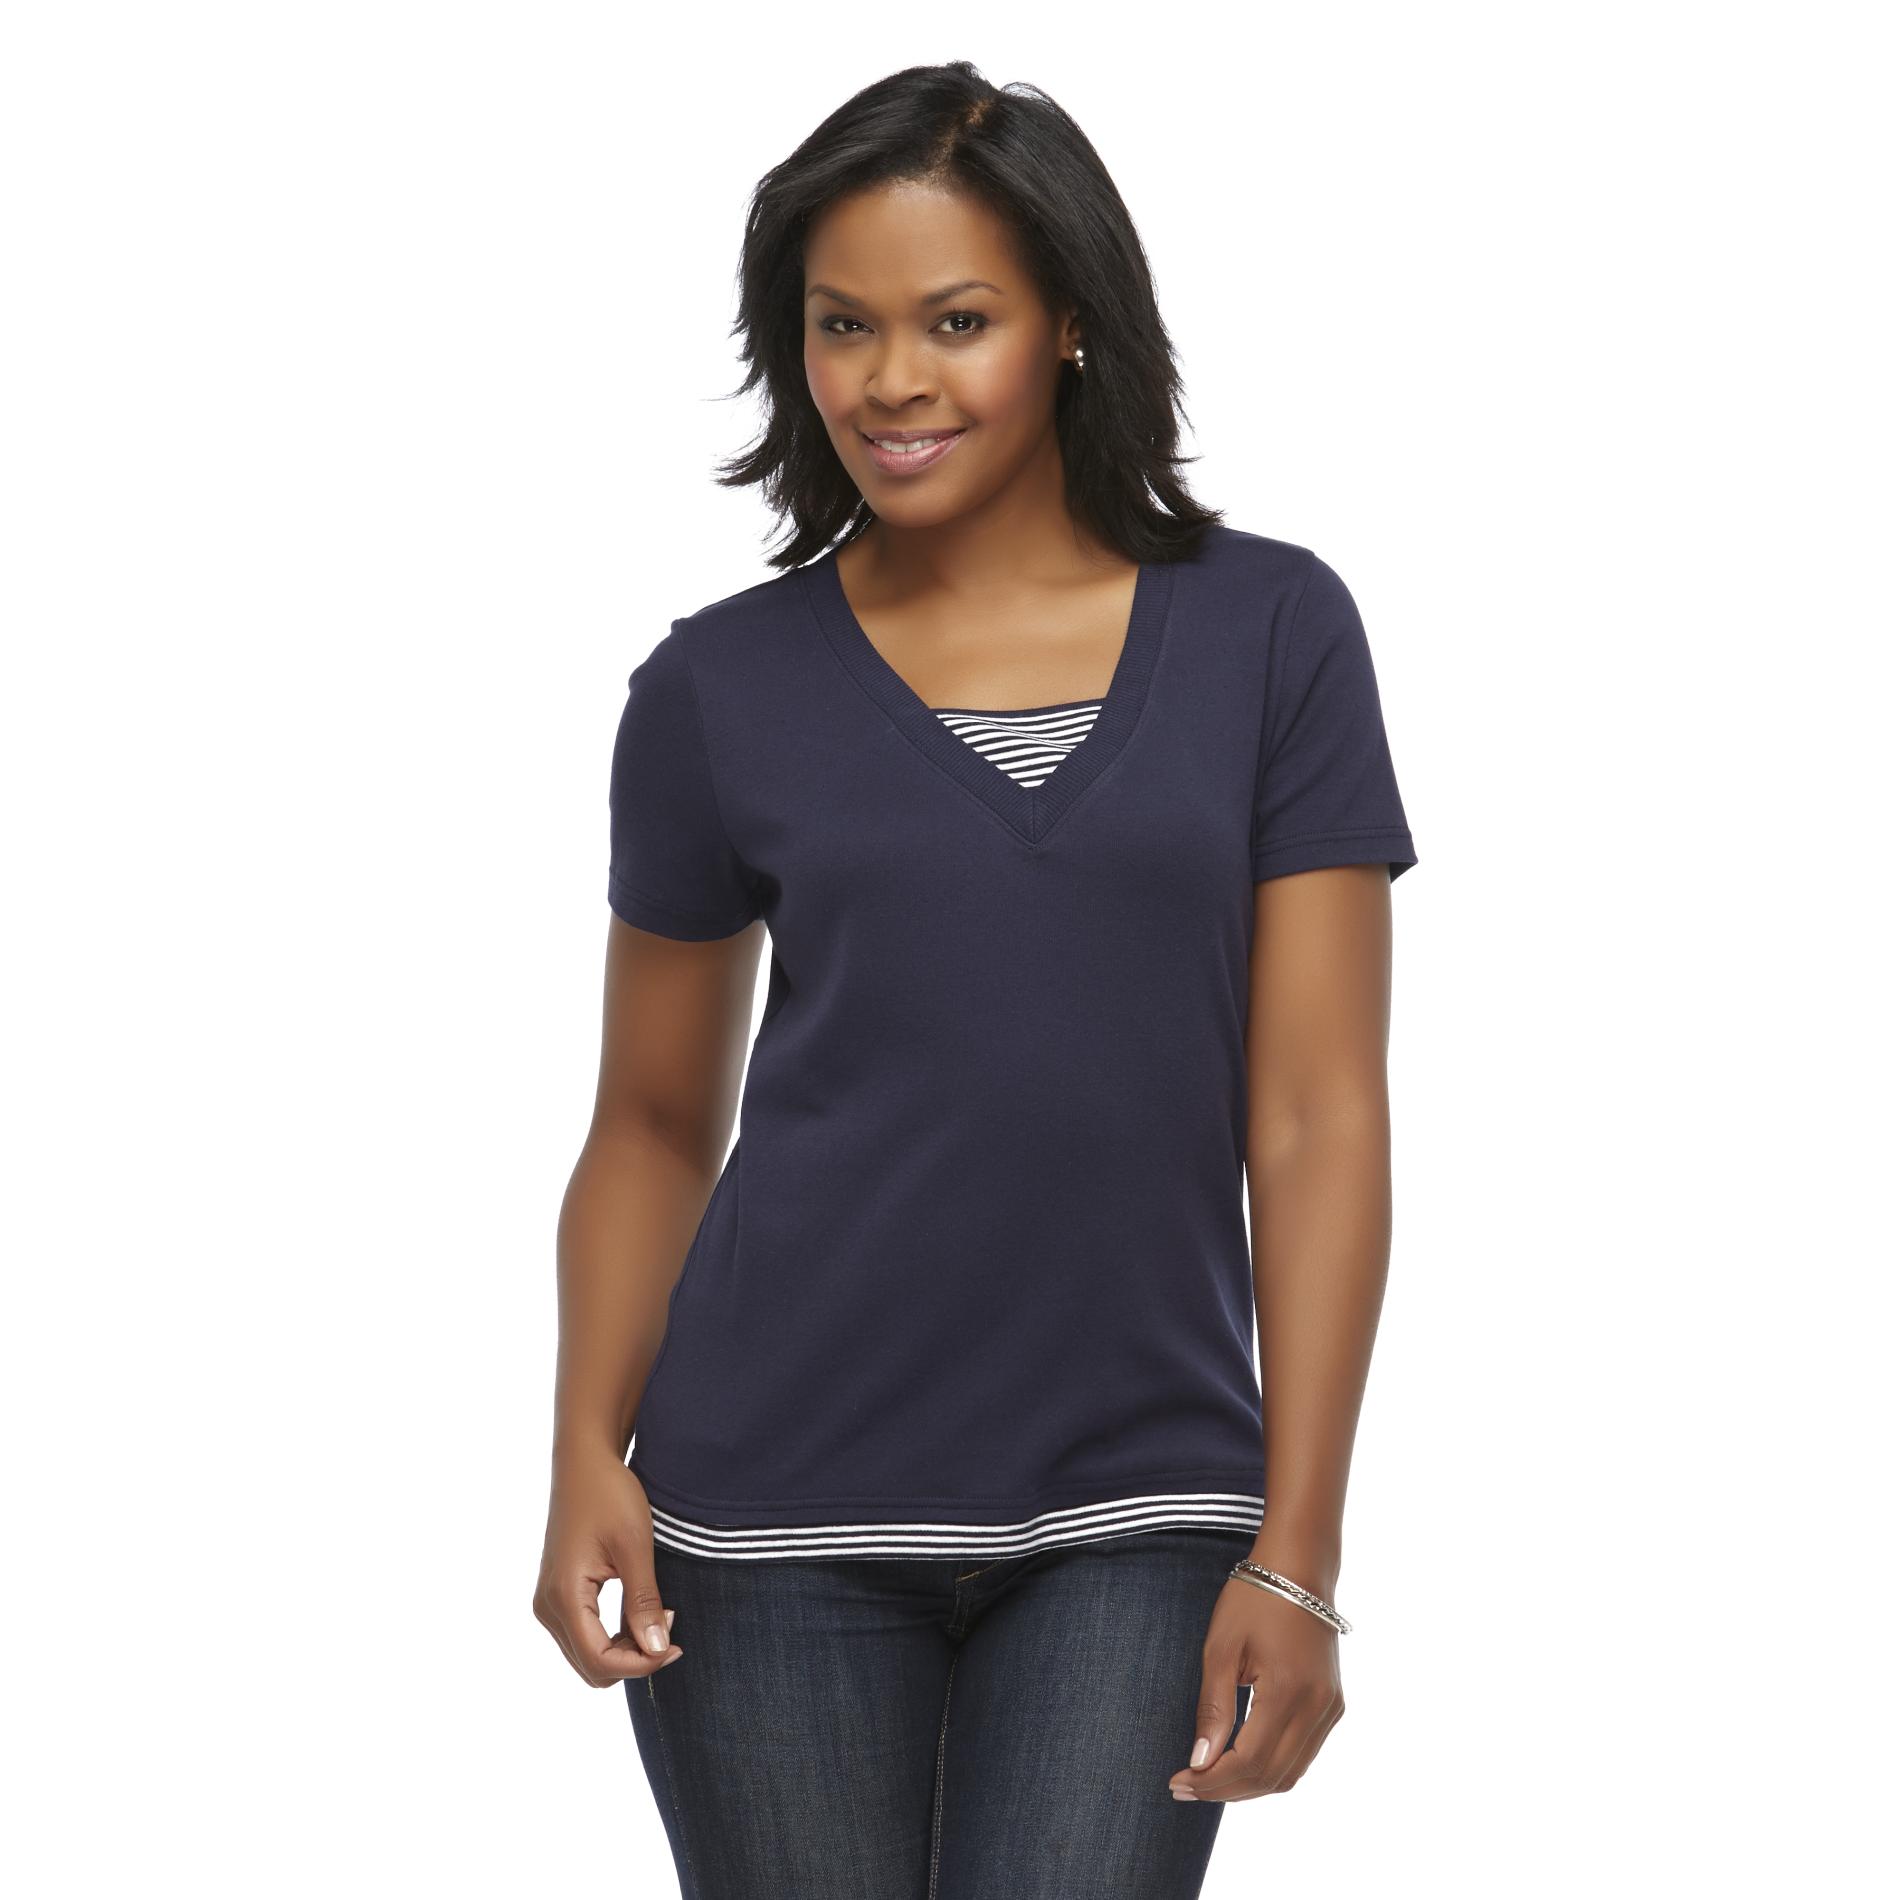 Basic Editions Women's Layered Look T-Shirt - Striped